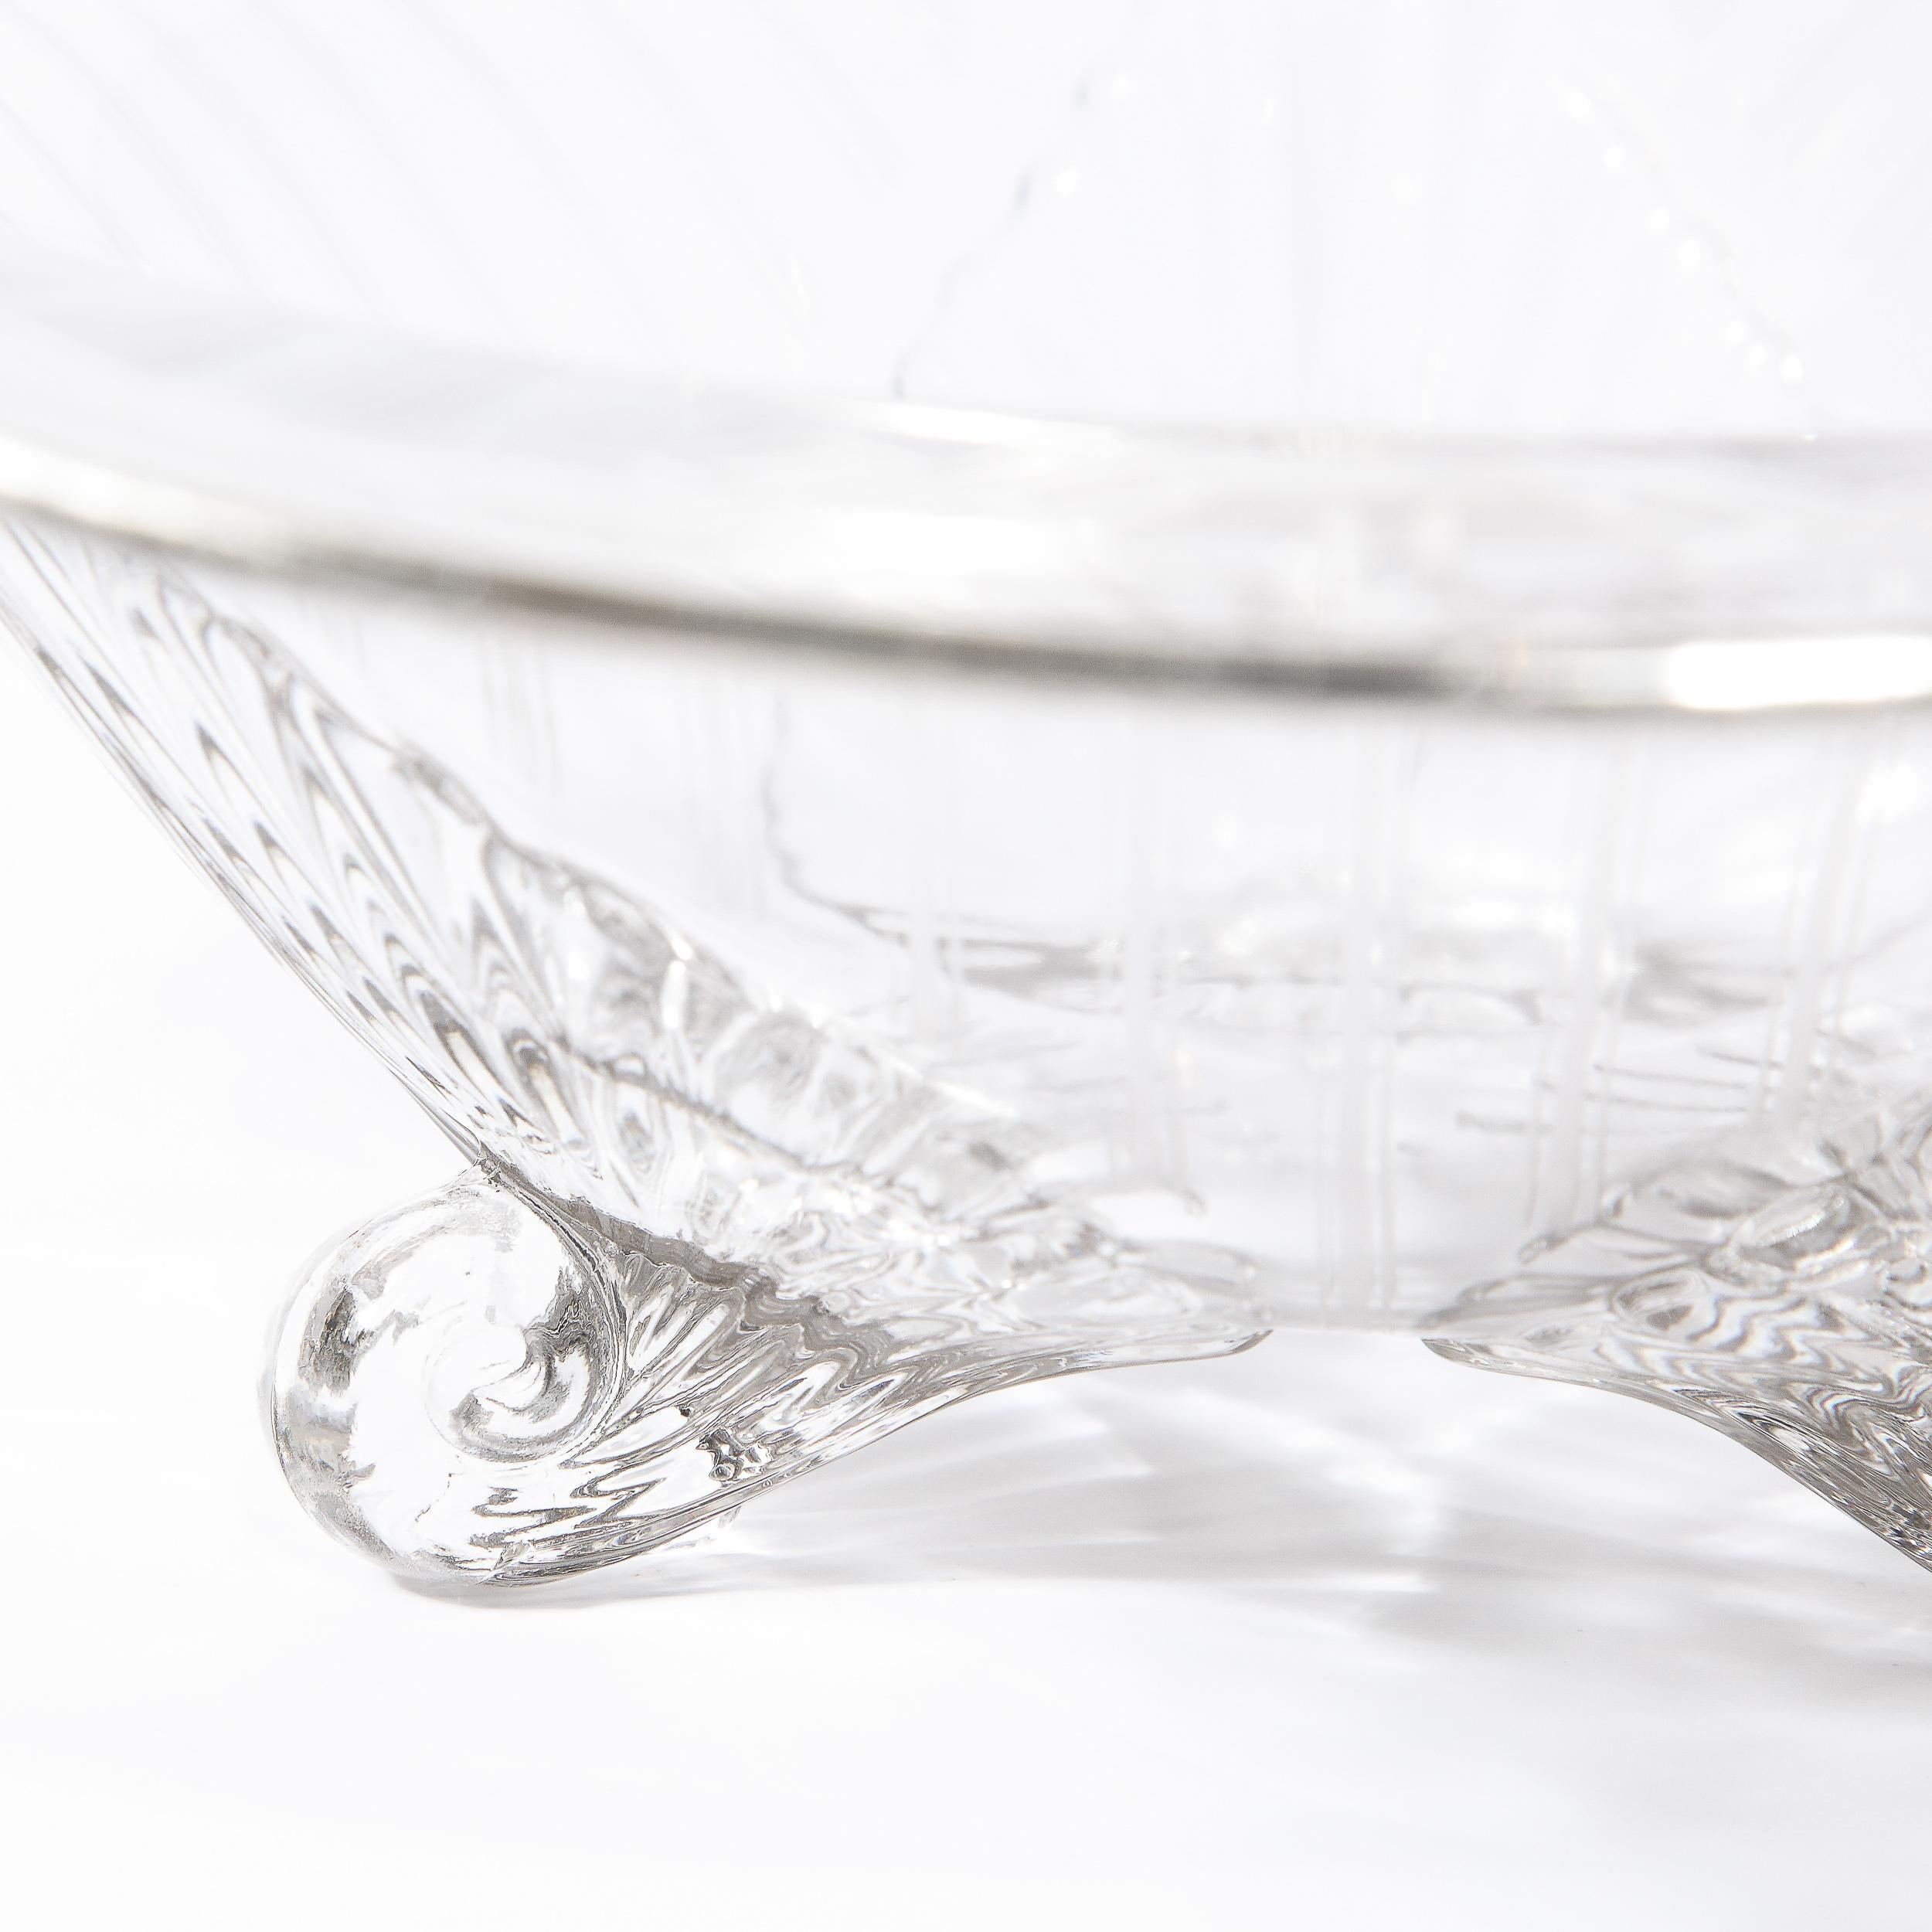 Art Deco Machine Age Translucent Glass Center Bowl with Sterling Silver Overlay For Sale 2